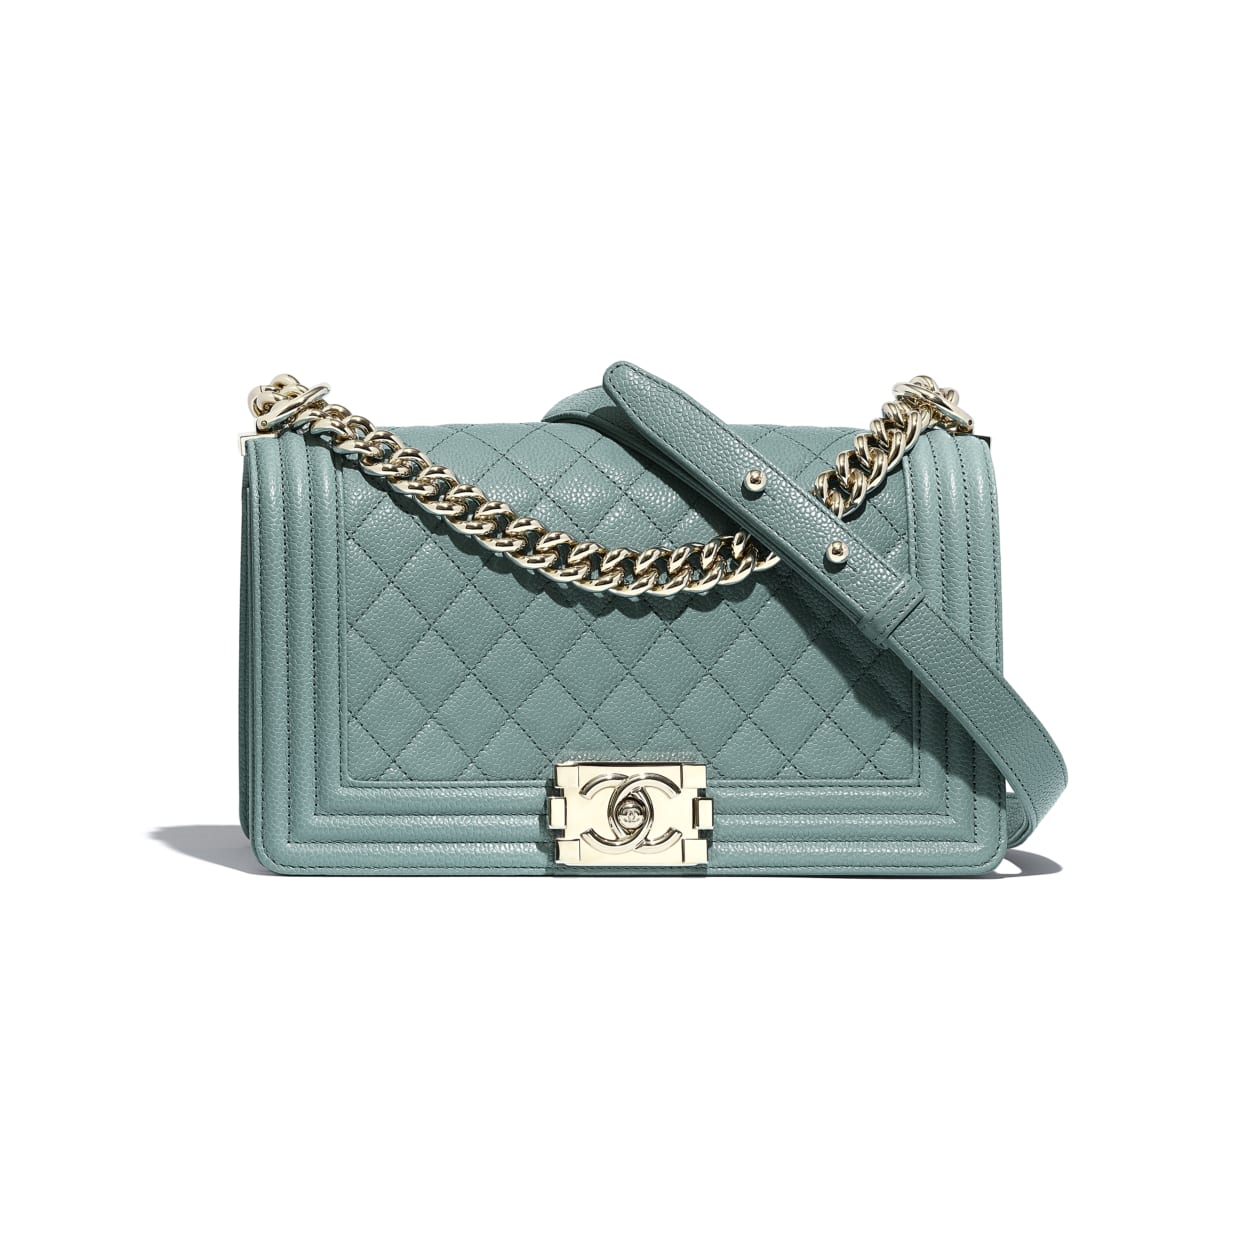 10 Steps You Can Take to Authenticate Any Chanel Bag